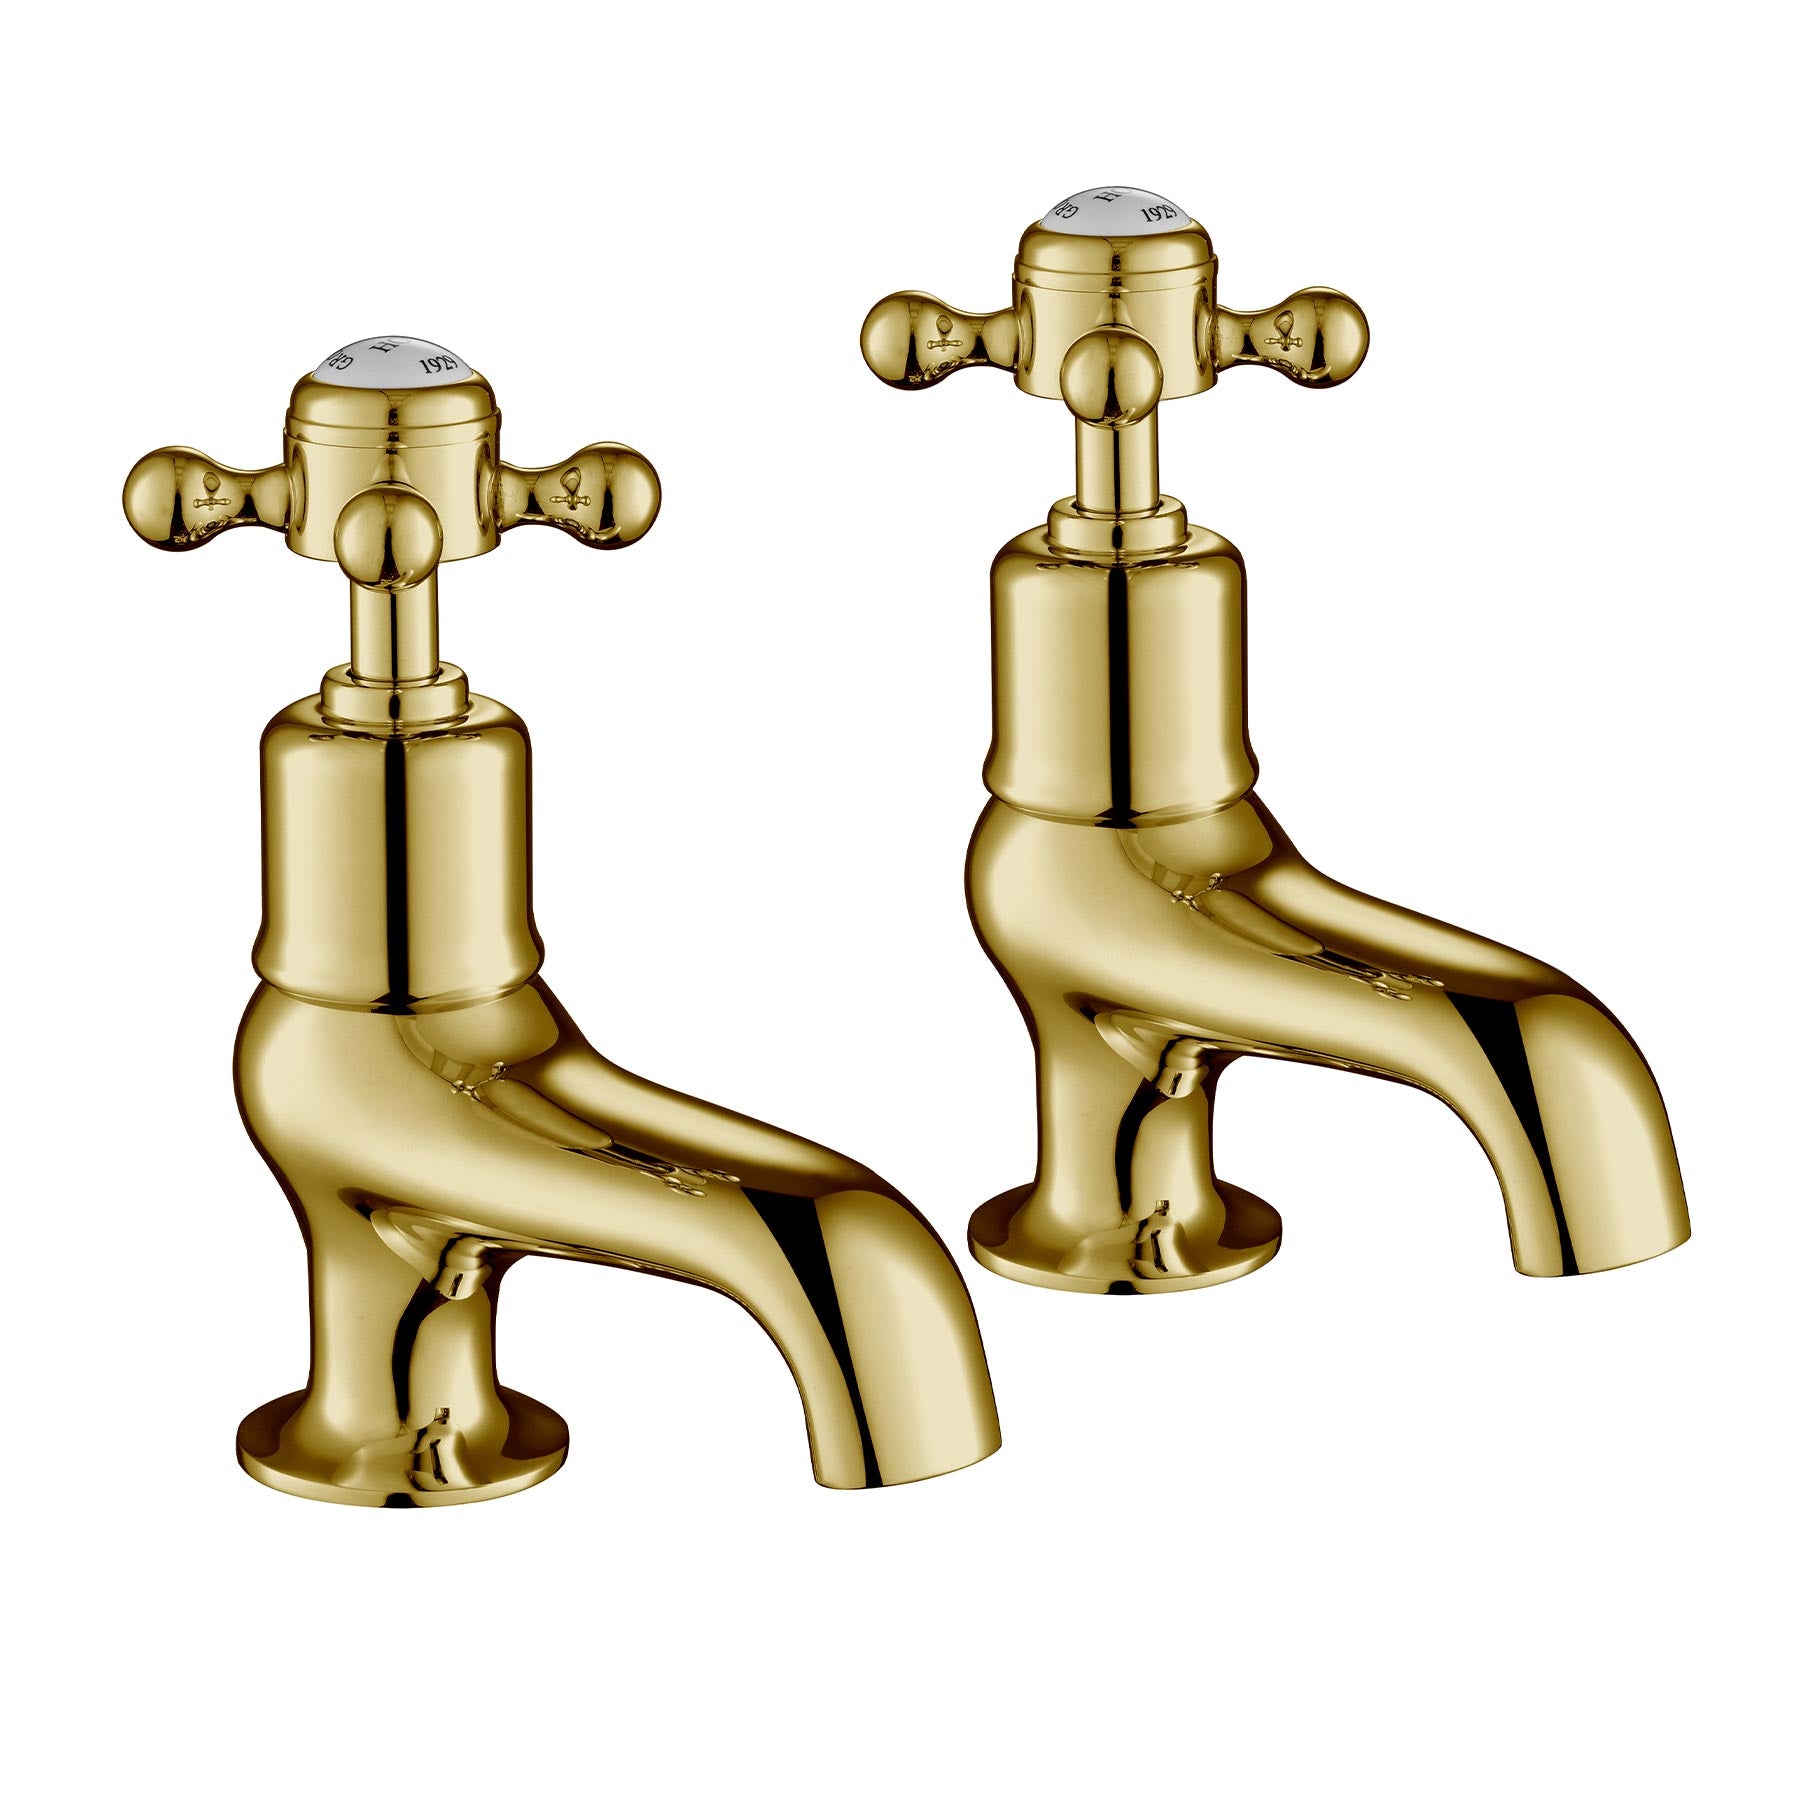 Antique Chester Cross Cloakroom Gold Basin Pillar Taps made of Brass with Antique Gold finish with Leak-Proof Ceramic Disc Technology LP 0.2